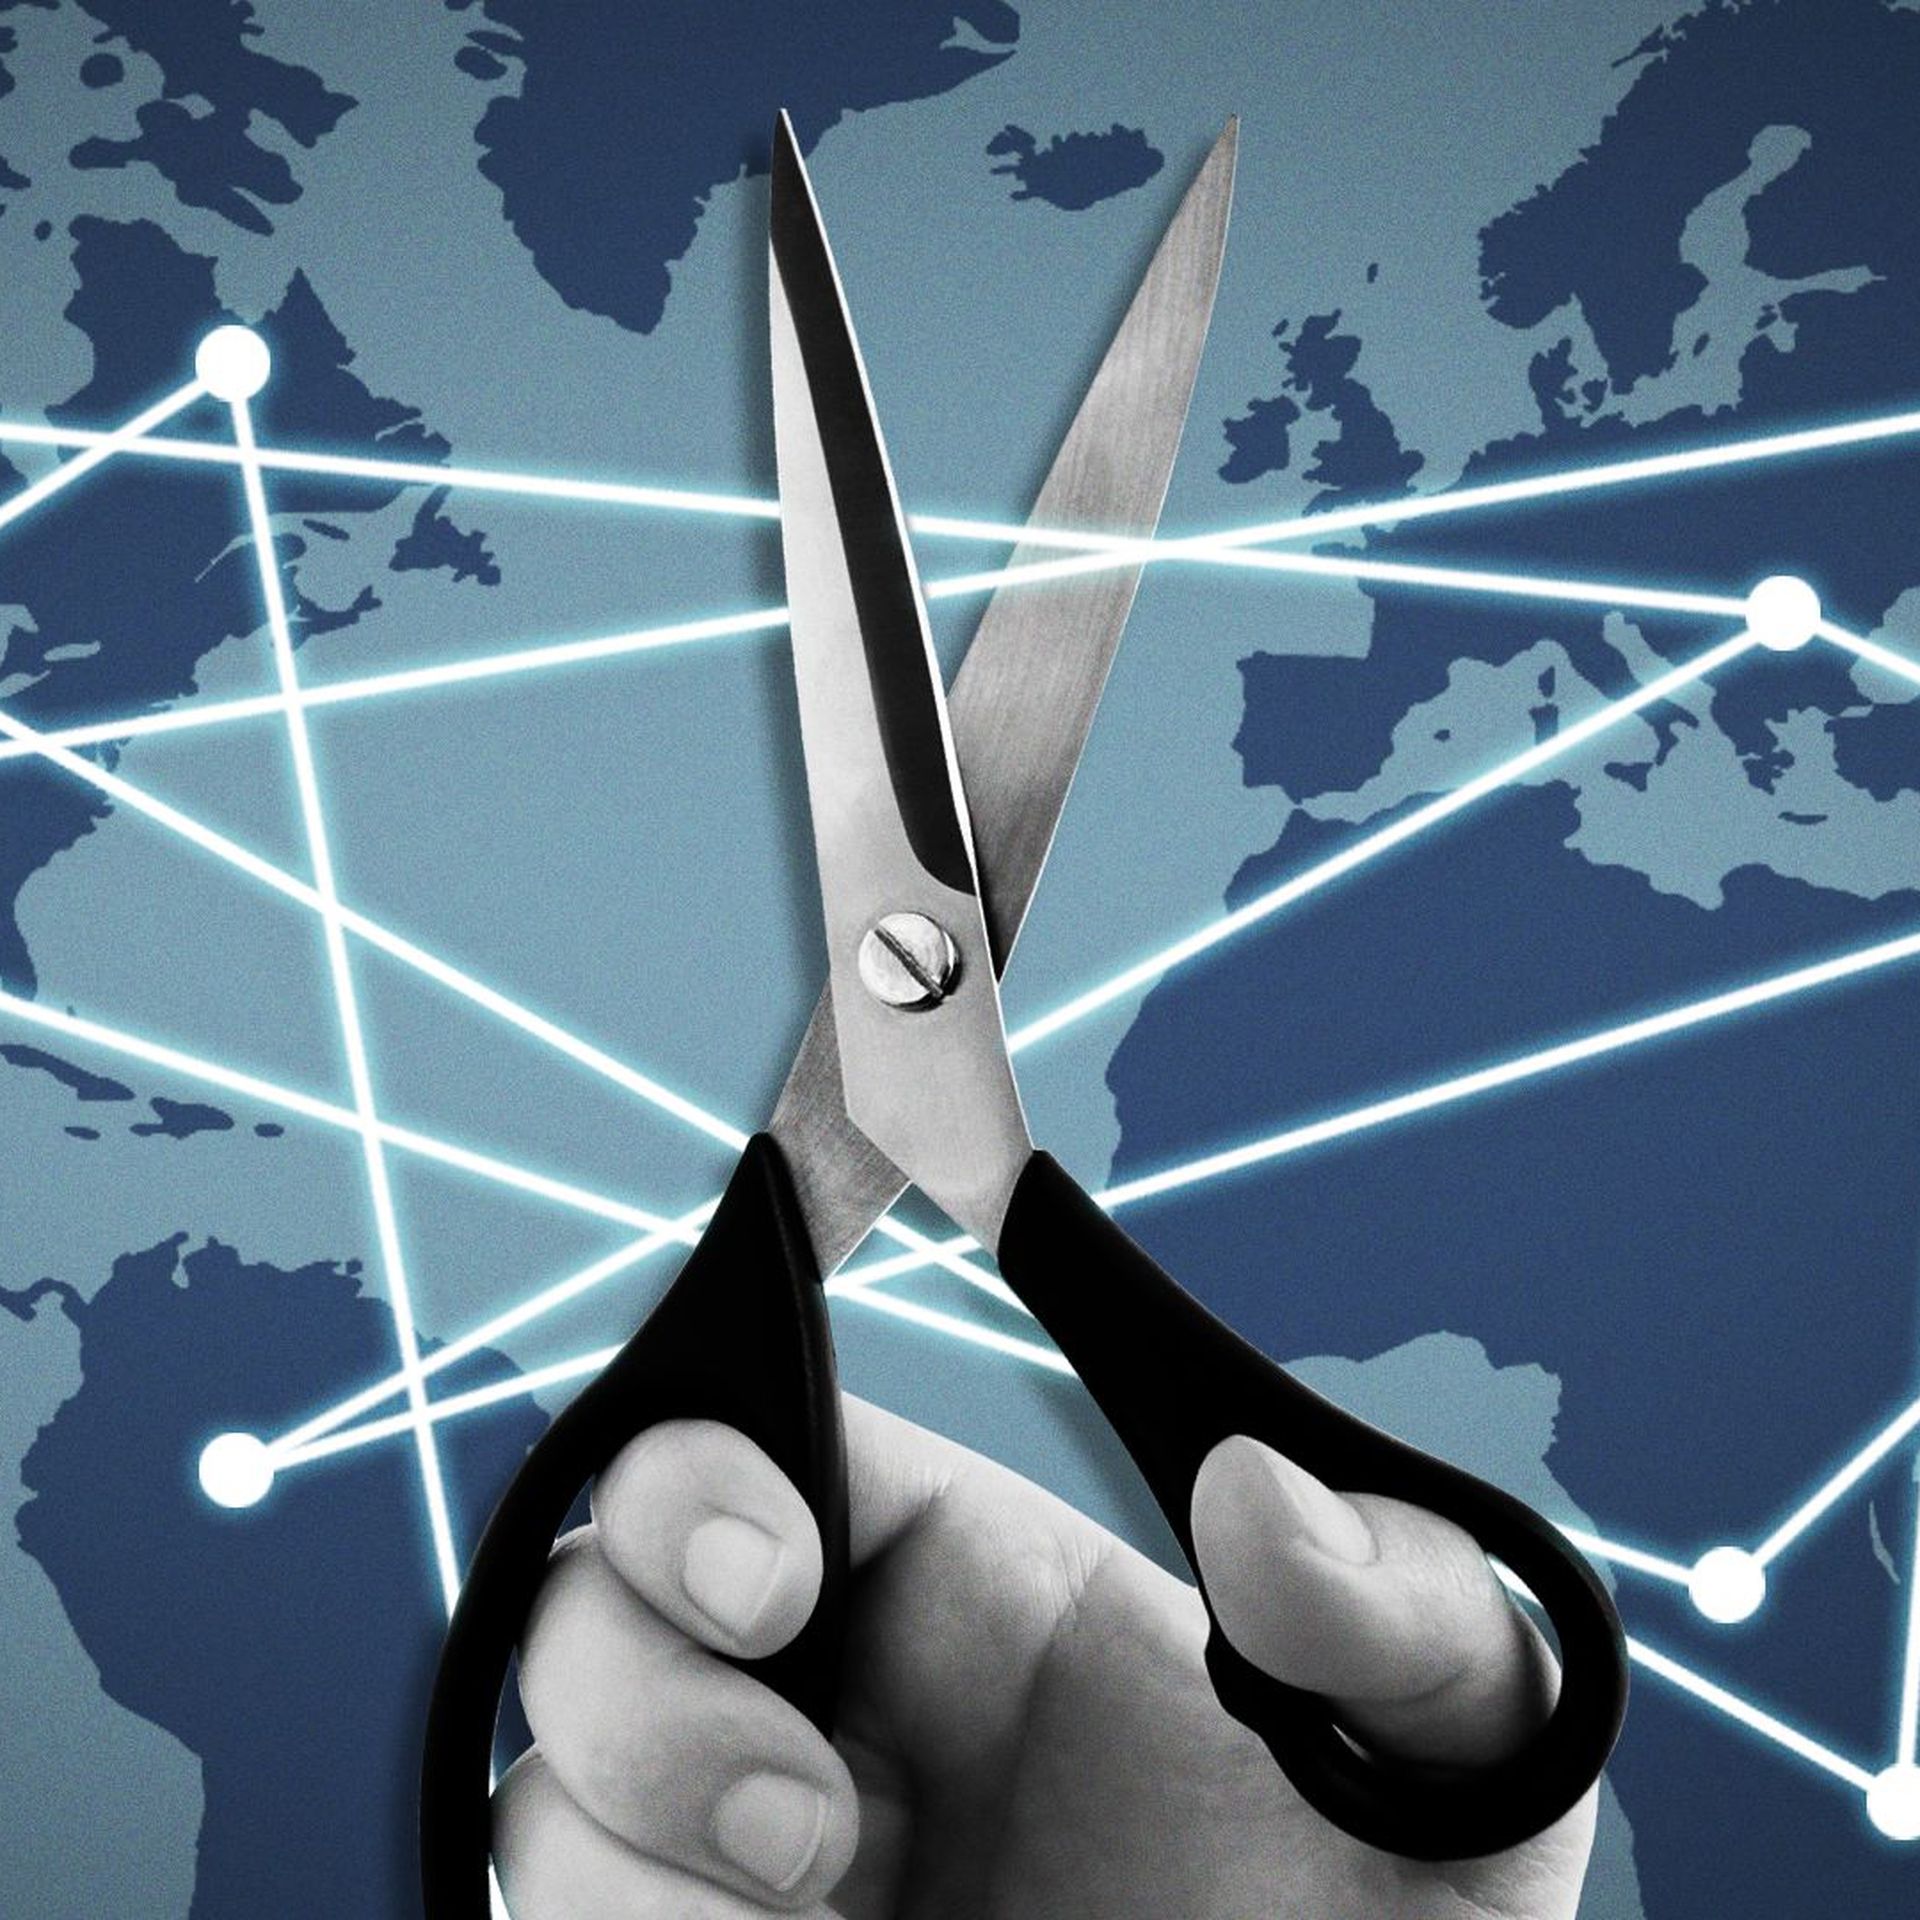 Illustration of scissors about to cut into flight paths on a map. 